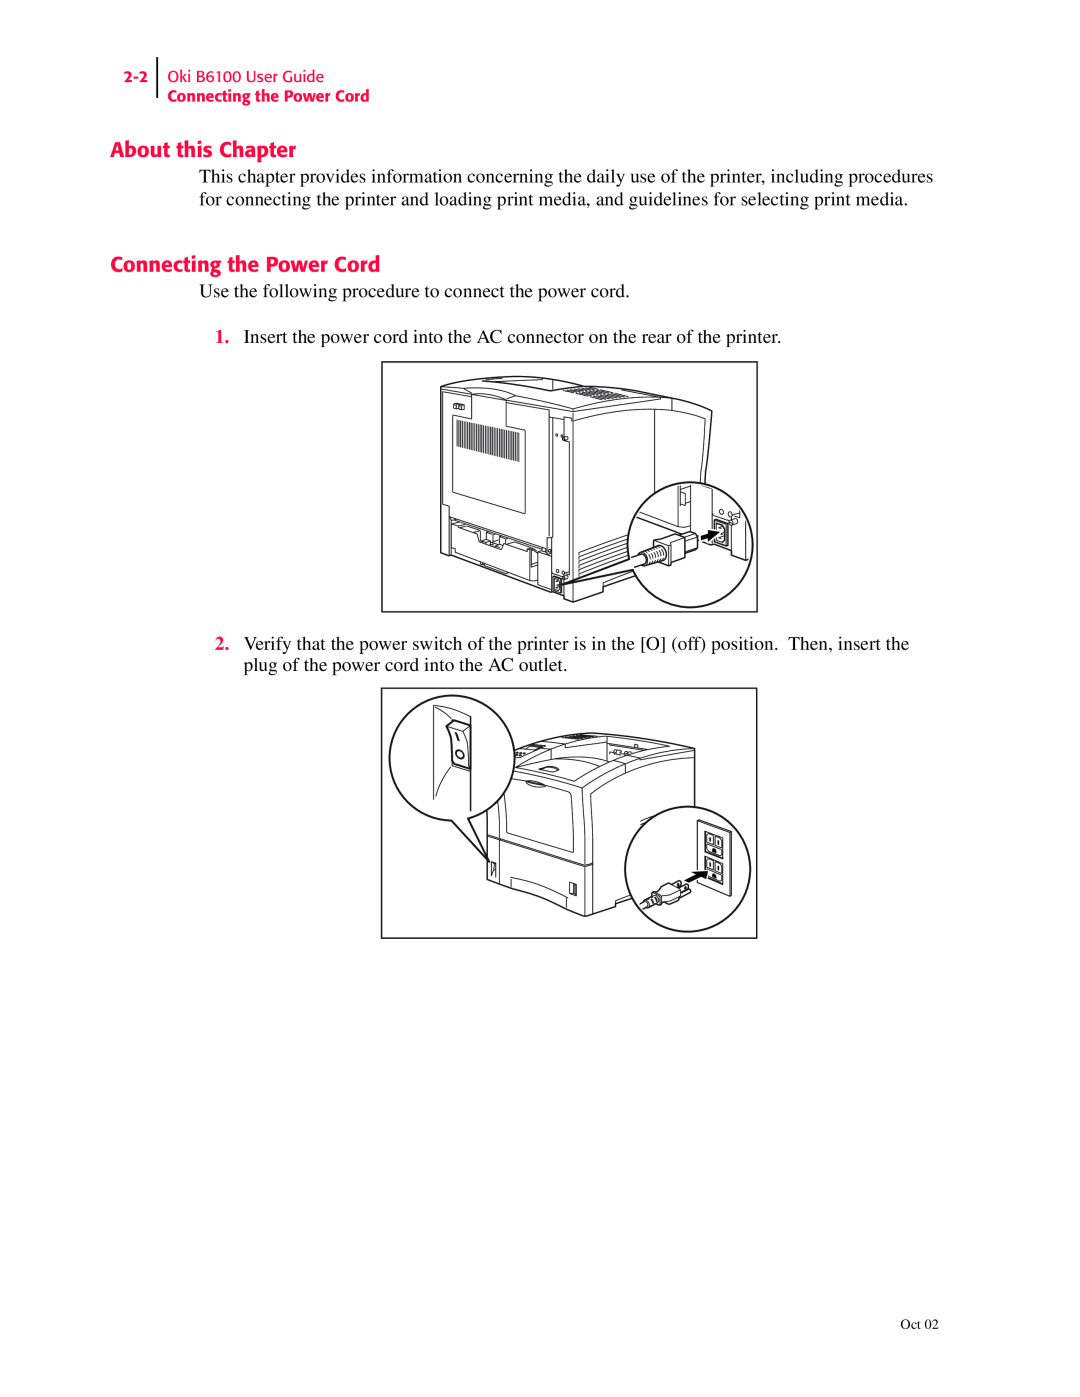 Oki manual About this Chapter, Oki B6100 User Guide Connecting the Power Cord 